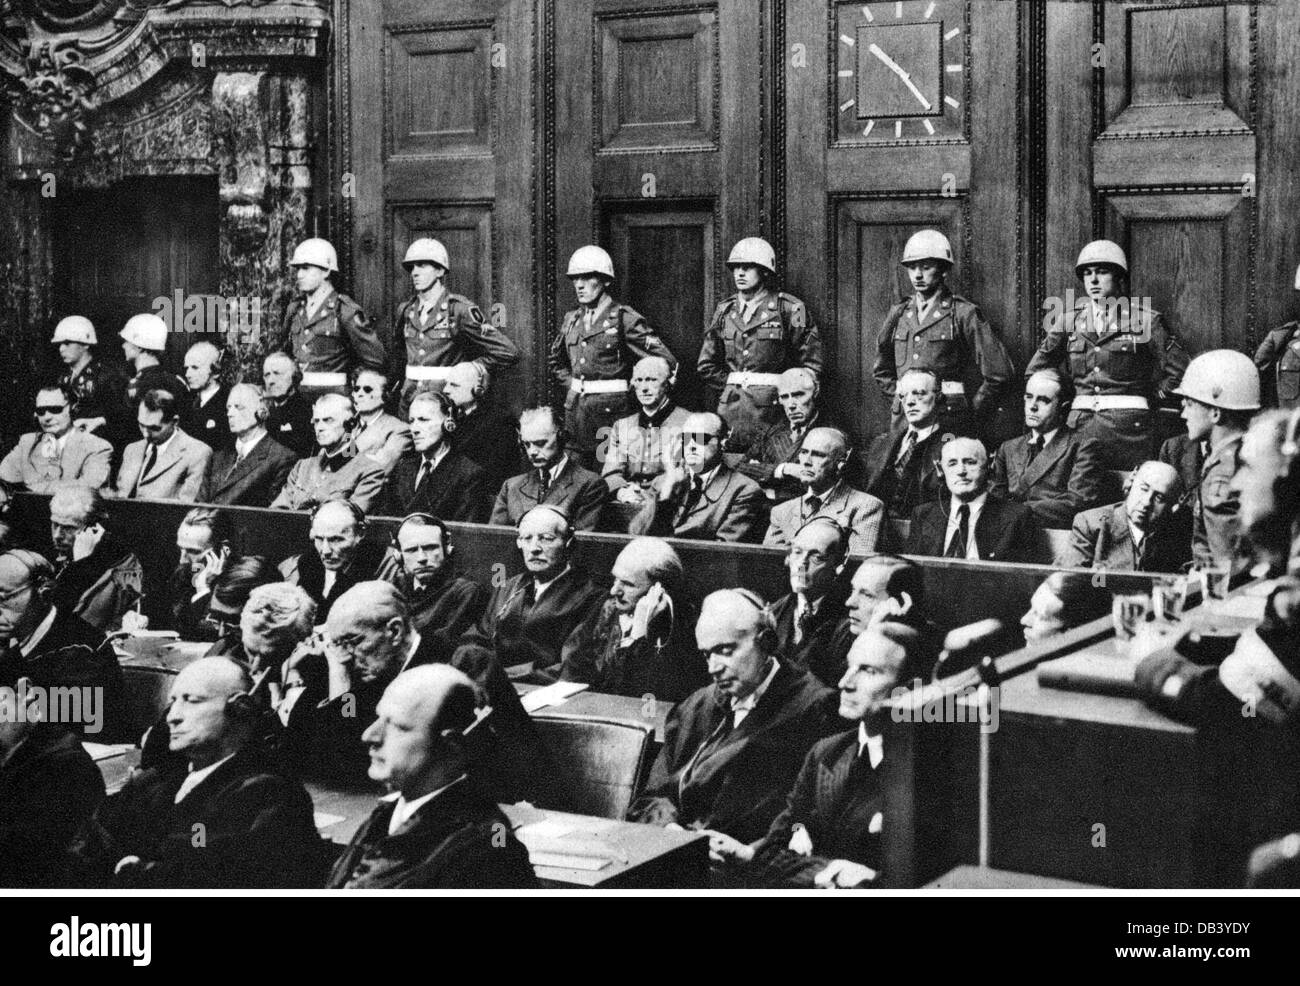 justice, lawsuits, Nuremberg Trials, trial against the major war criminals, dock, Nuremberg, 1945 / 1946, Additional-Rights-Clearences-Not Available Stock Photo